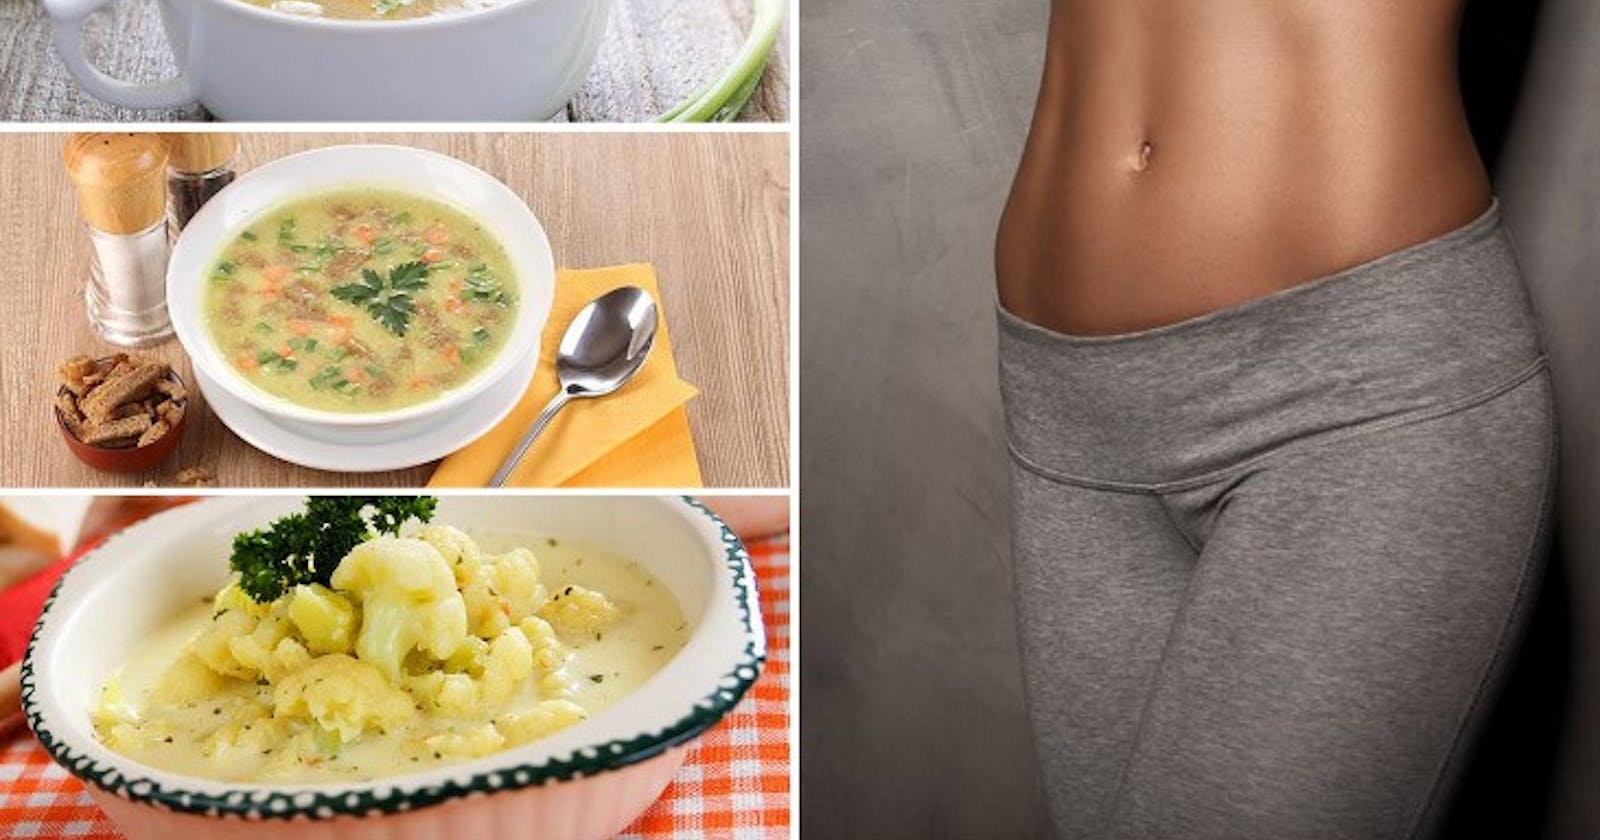 14-Day Rapid Soup Diet System Review - Does It Work?